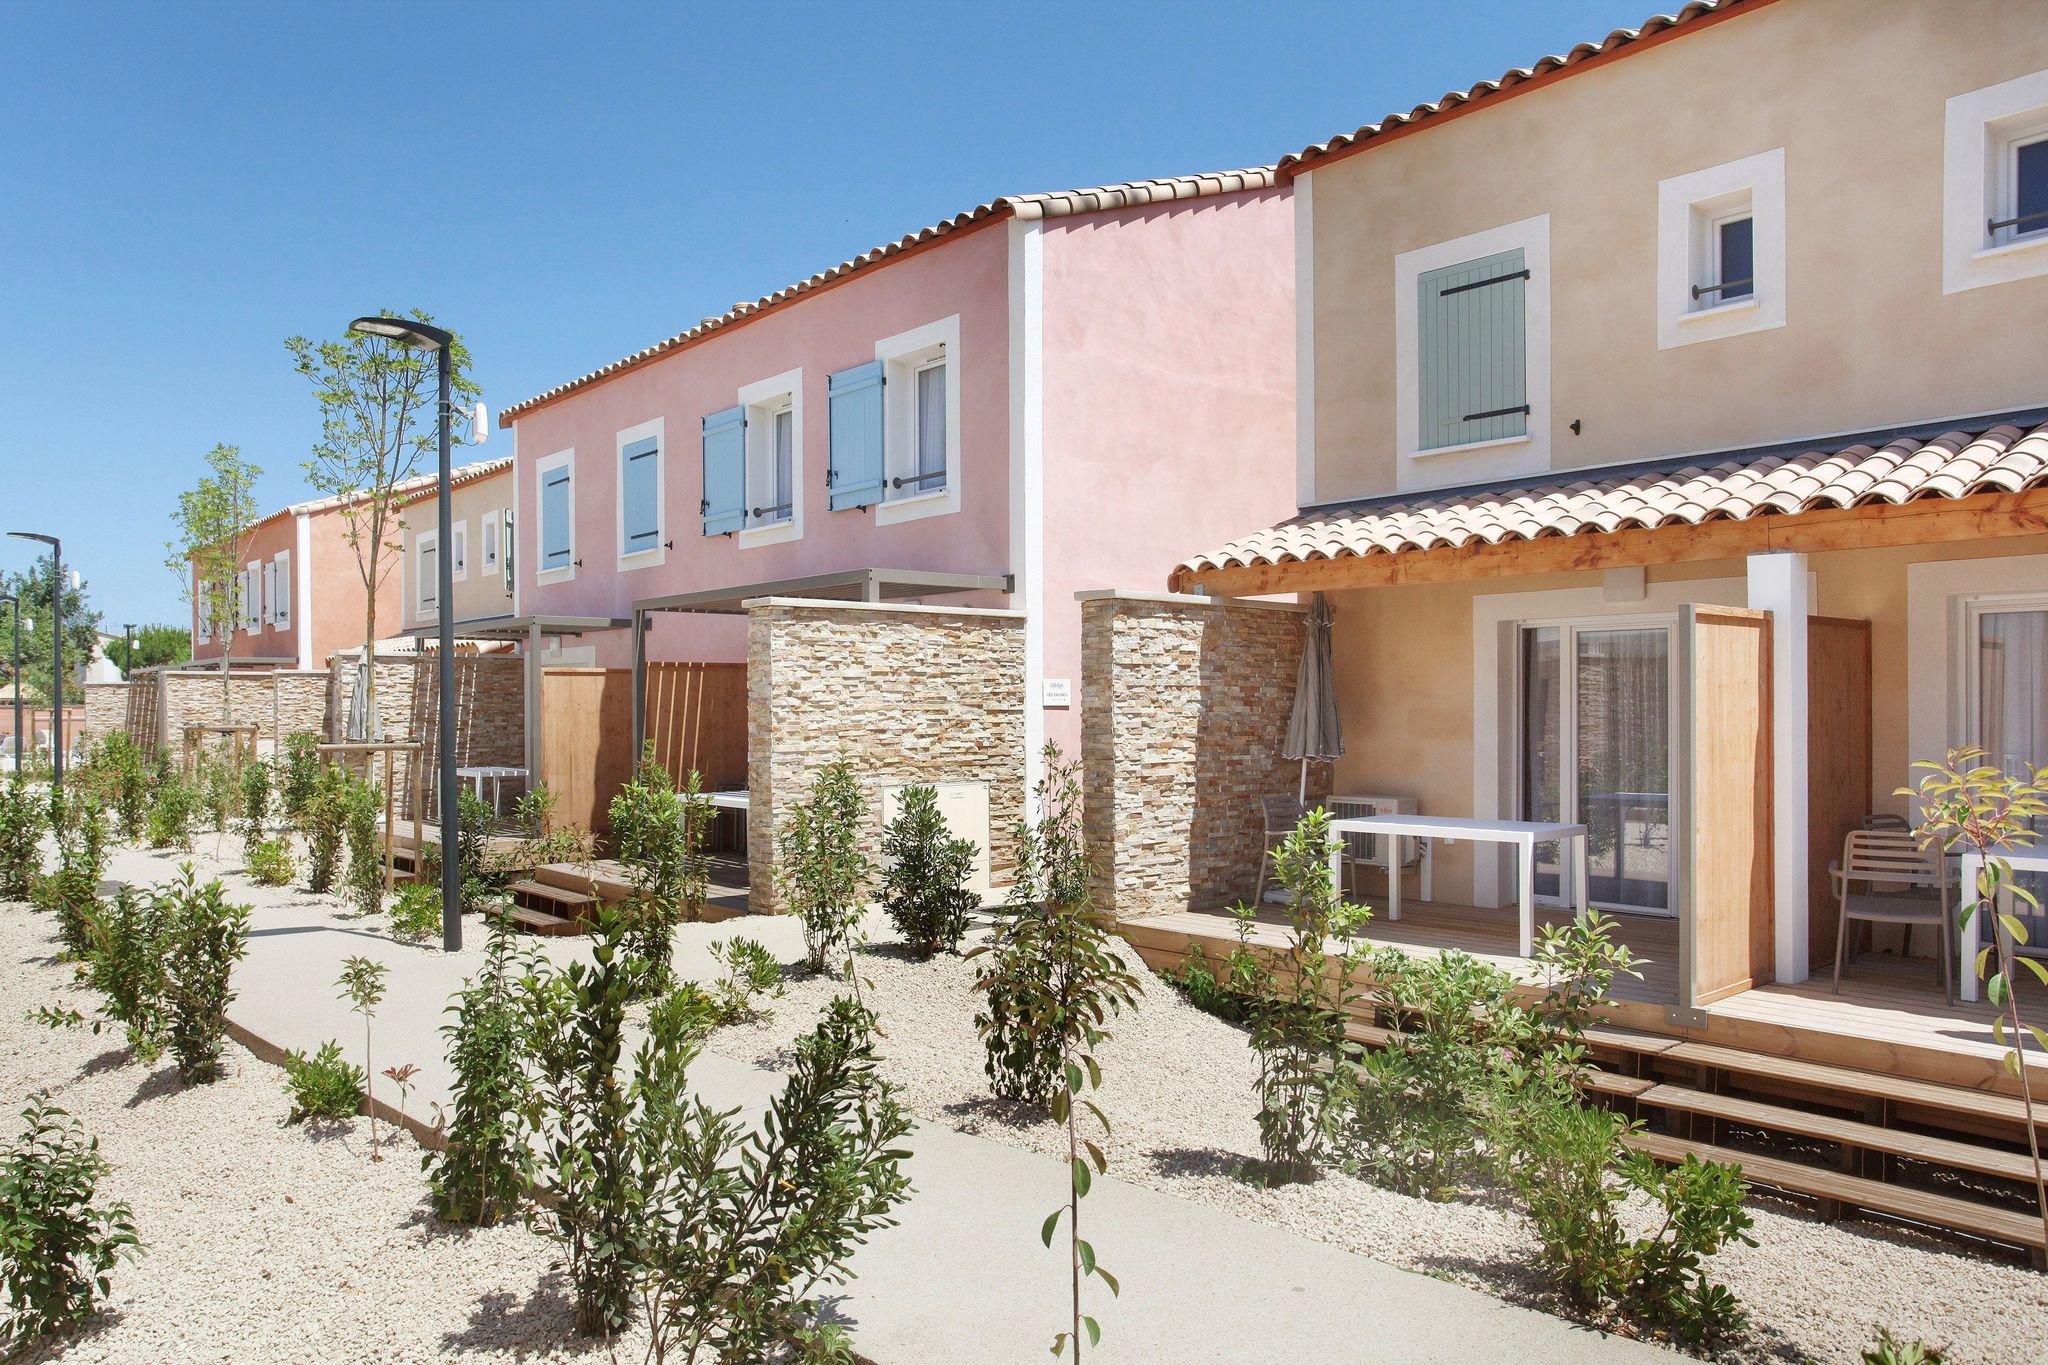 Nicely maintained apartment near the historic Aigues-Mortes